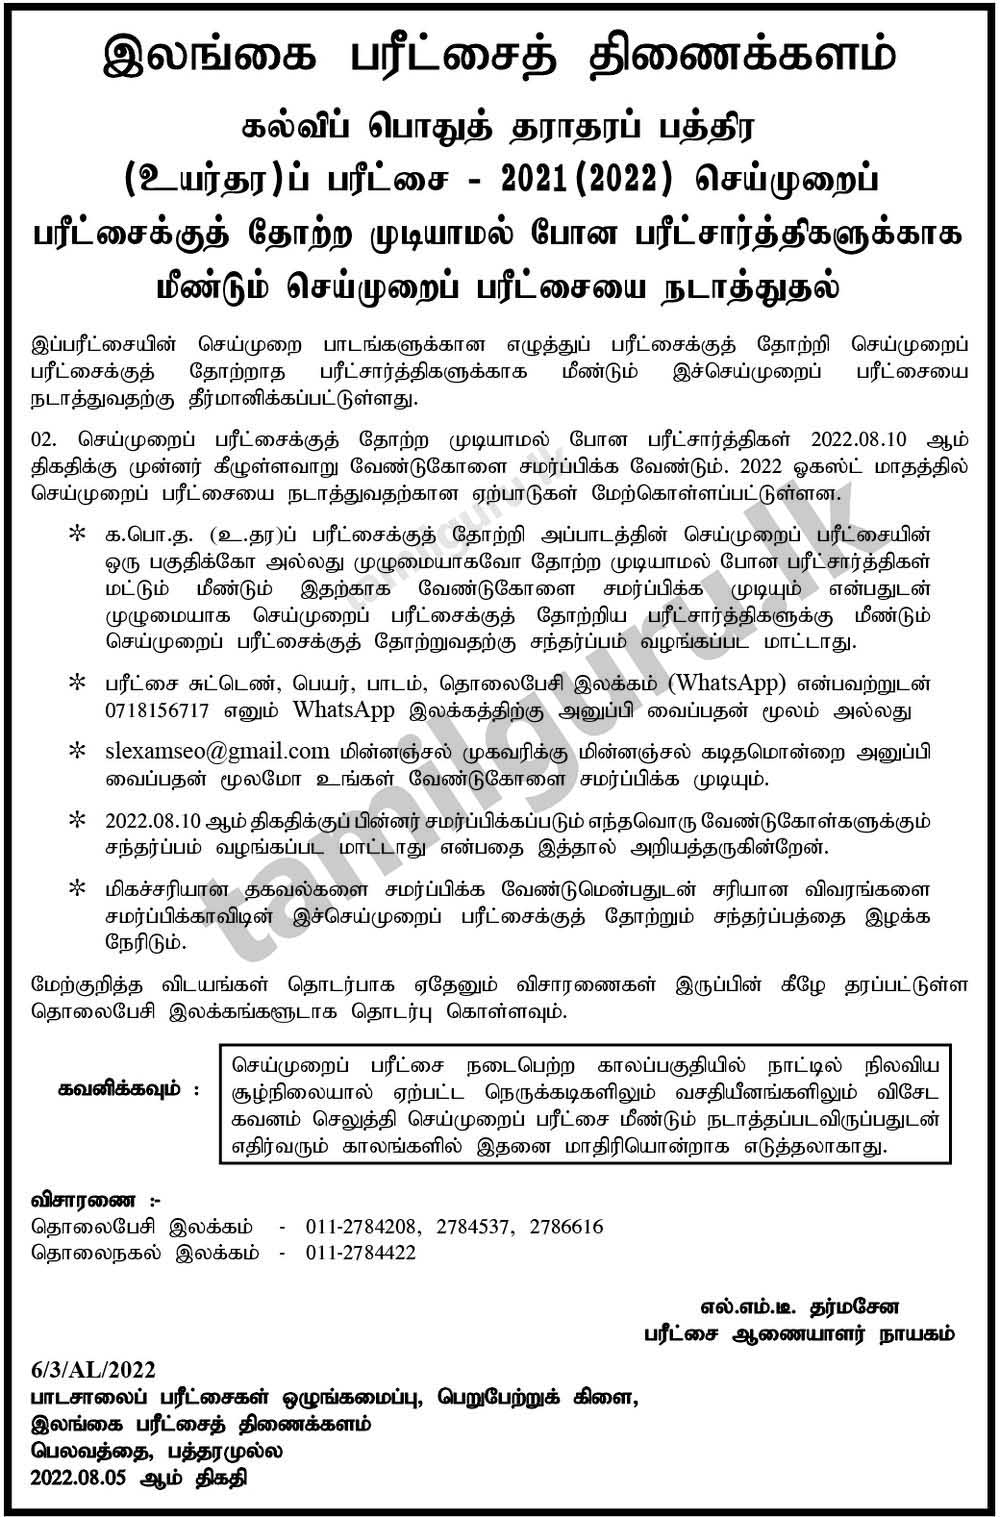 Reconducting Practical Tests (August) - GCE AL Examination 2021 (2022) Notice in Tamil